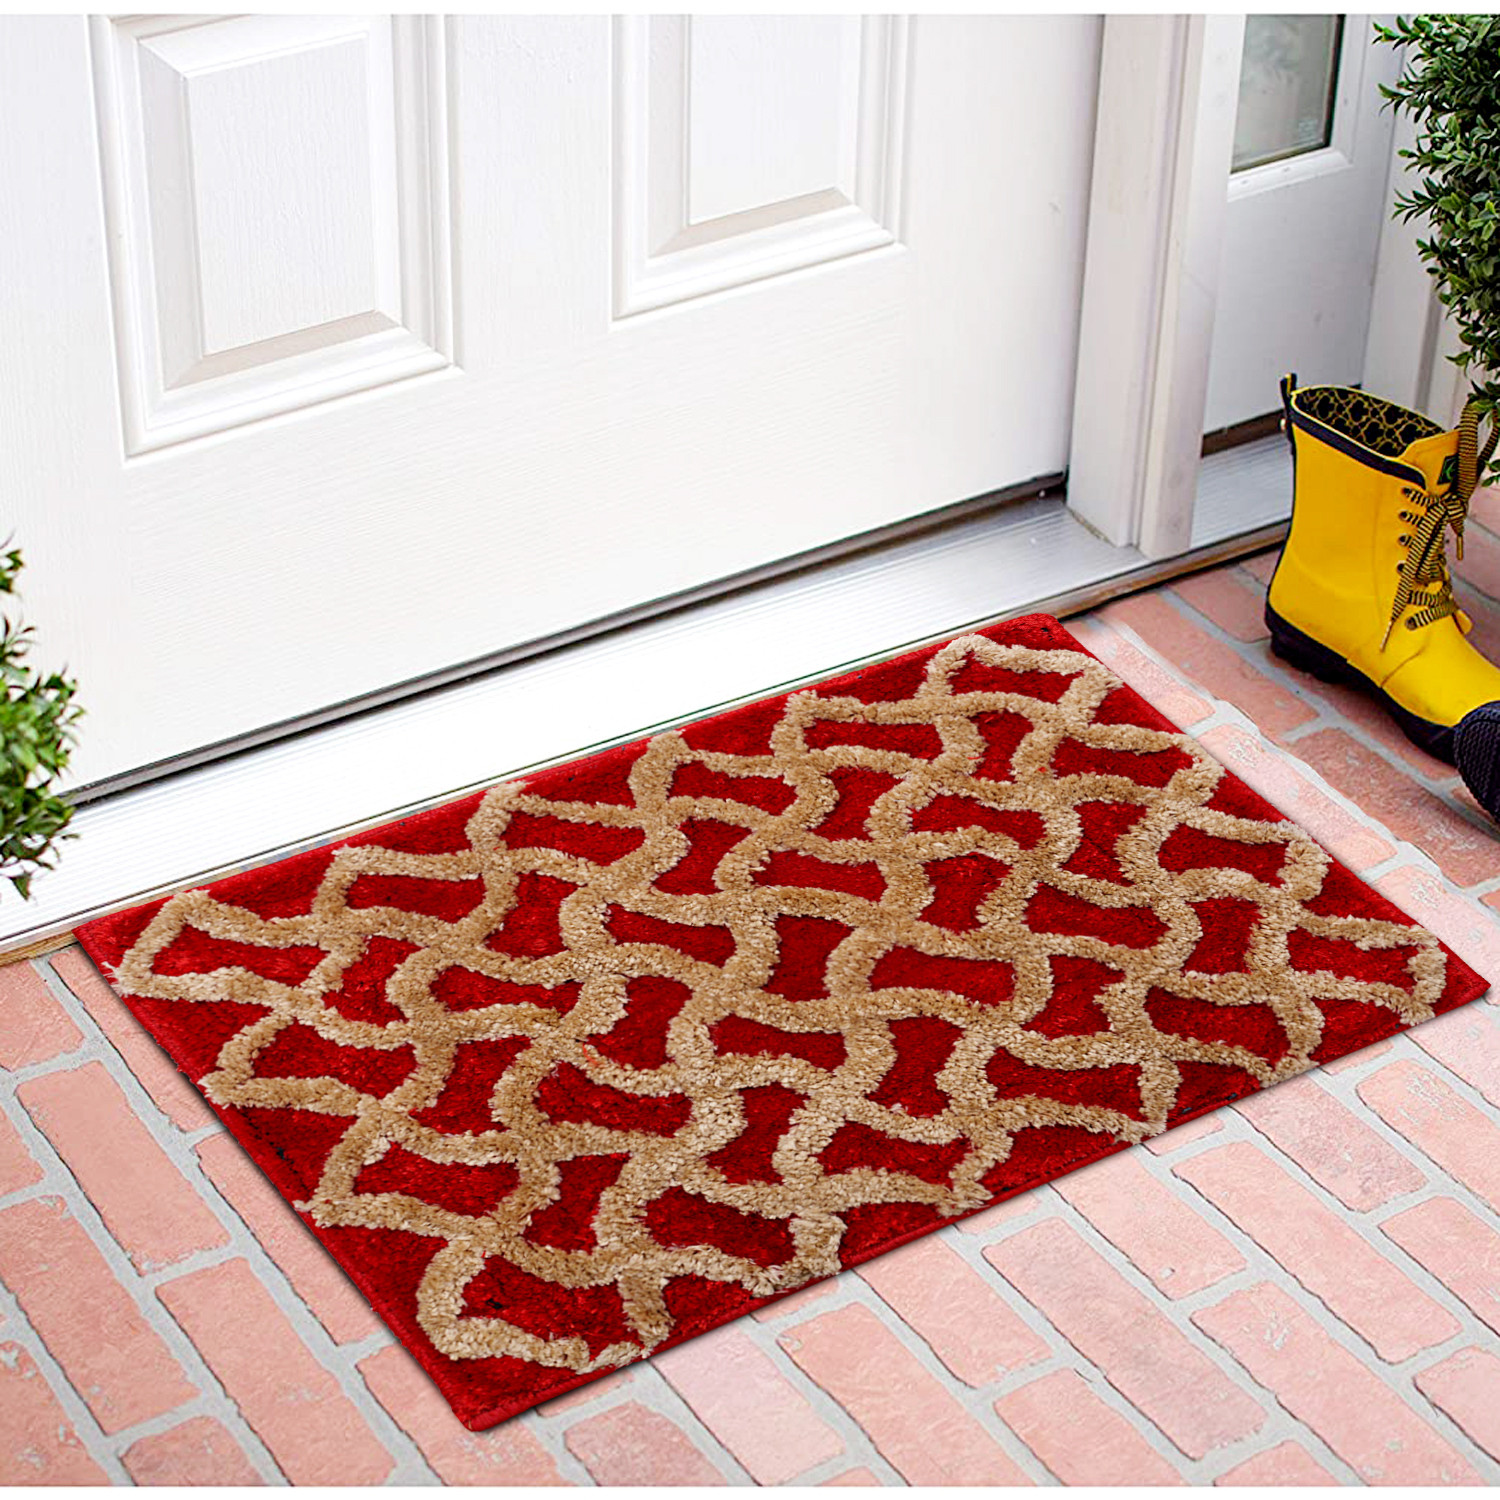 Kuber Industries Soft, lightweigth, Washable, Non Slip Doormat Entrance Rug Dirt Trapper Mat Shoes Scraper for Entry, Patio, Porch- Pack of 3 (Maroon & Dark Brown & Red)